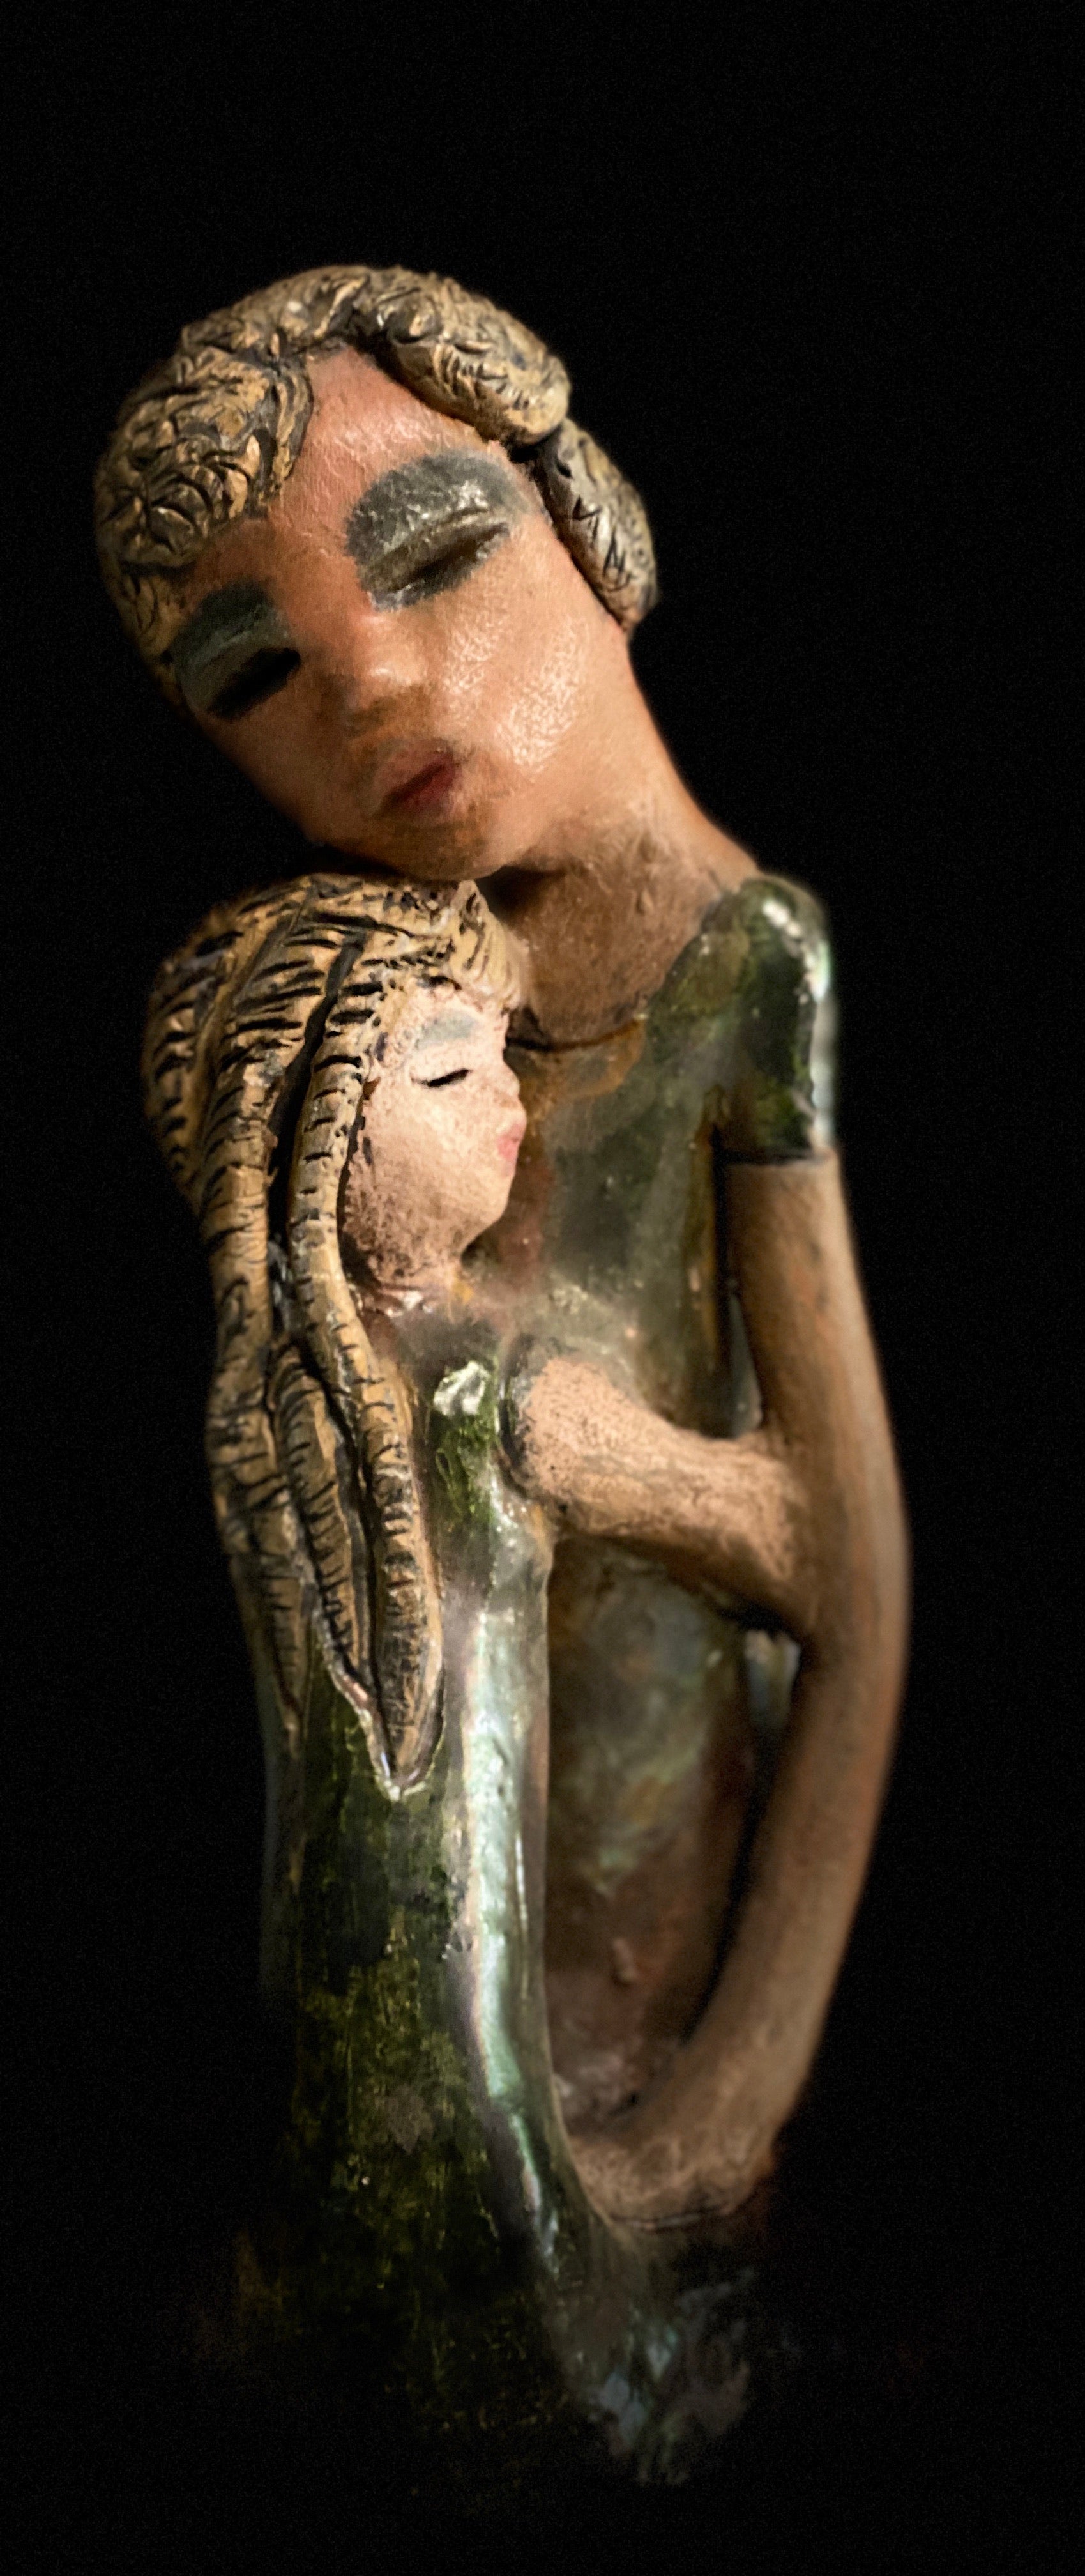 "Hold Me Mama has a very similar look and feel as                             Girl Talk with my Mom". Hold Me Mama depicts the bond between a mother and child". They stand 10" x 5" x 5" and weighs 2.8 lbs. Mother and Child has honey brown complexions  with etched copper colored  clay hair. They wear green/ copper raku fired glossy dresses.  Mother assures her daughter  that everything will be alright!